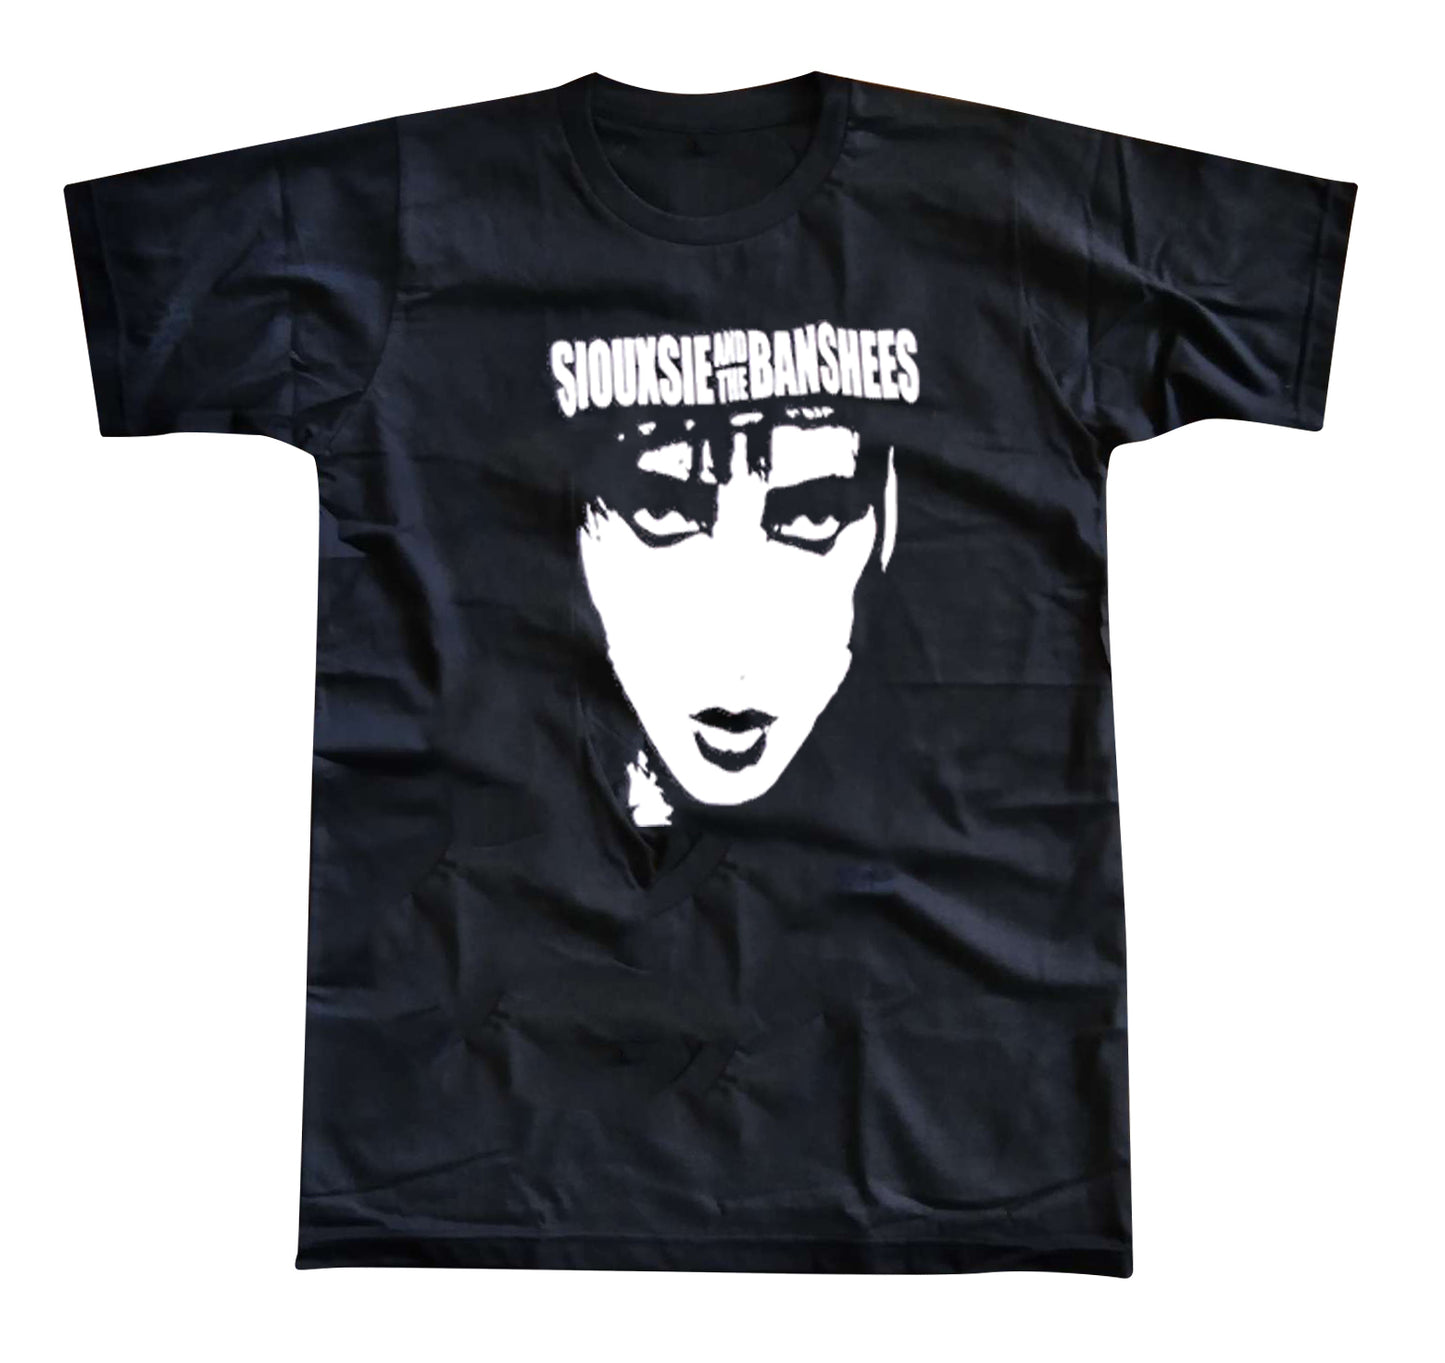 Siouxsie And The Banshees Short Sleeve T-Shirt